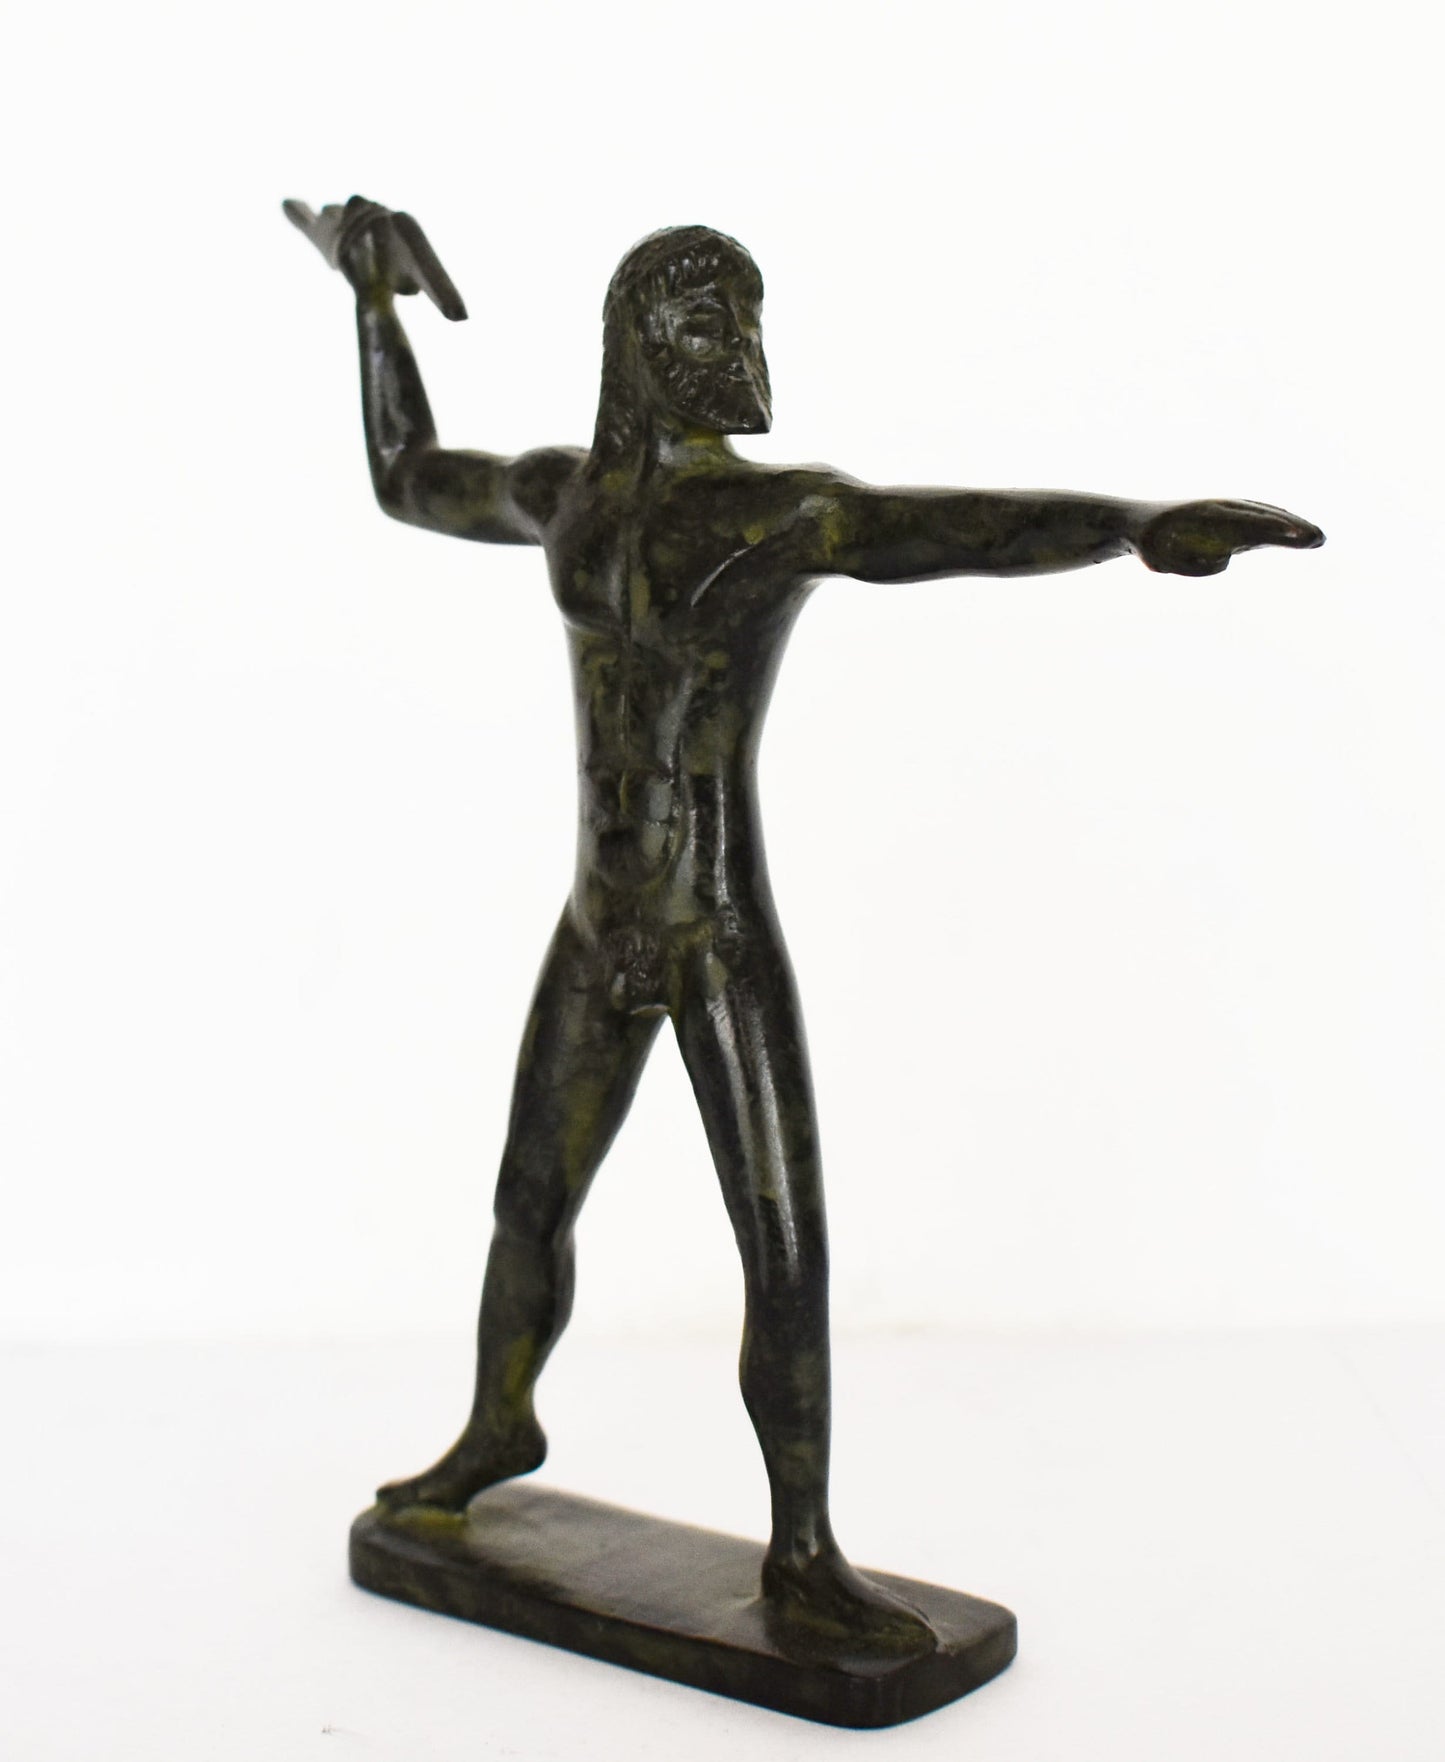 Zeus Jupiter-  Greek Roman King of all Gods of Mount Olympus - Ruler of Sky, Lightning and Thunder - Chief Figure - pure bronze statue